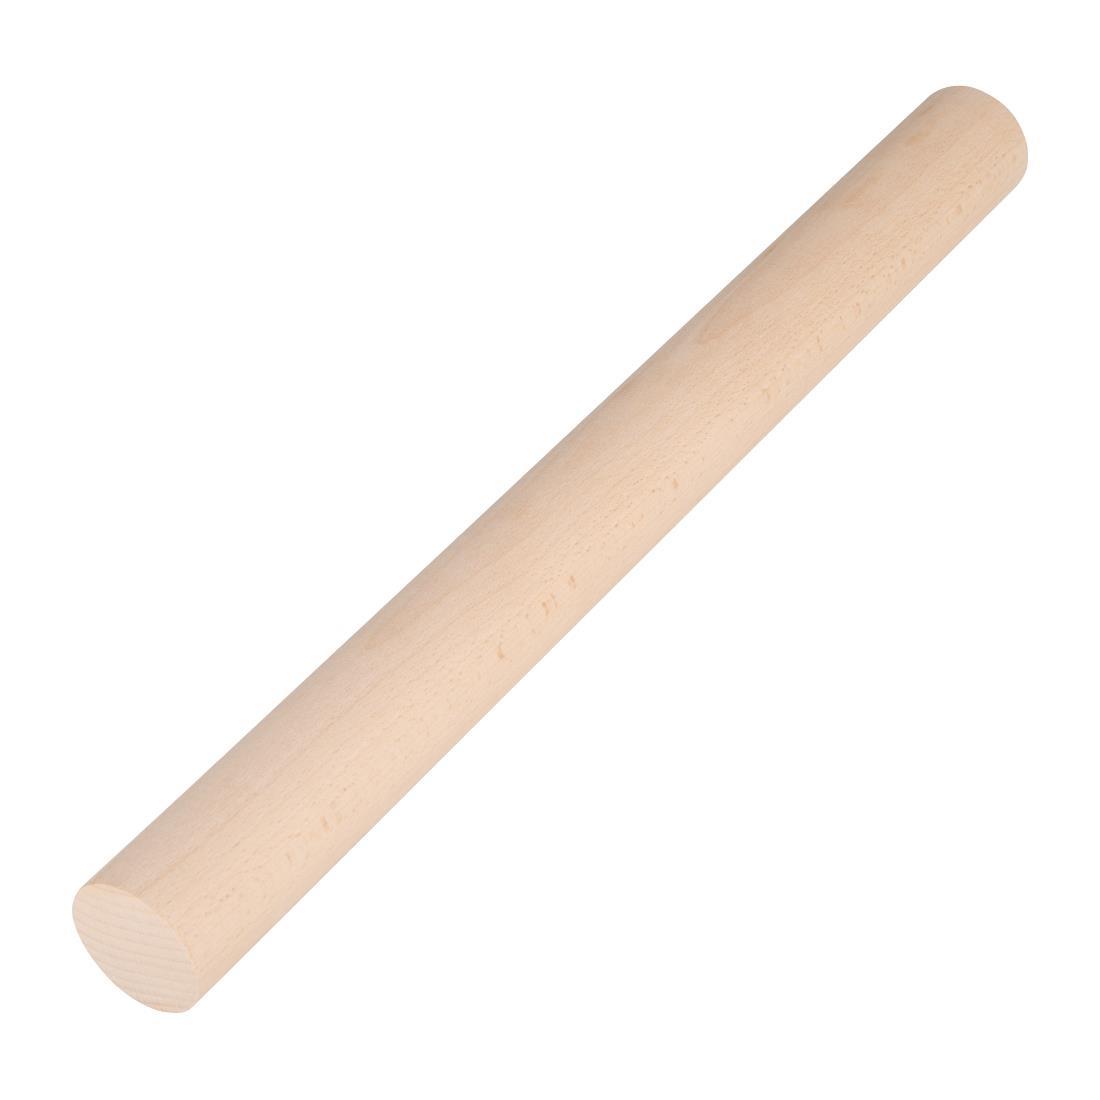 Vogue Wooden Rolling Pin 18" - J102  - 1